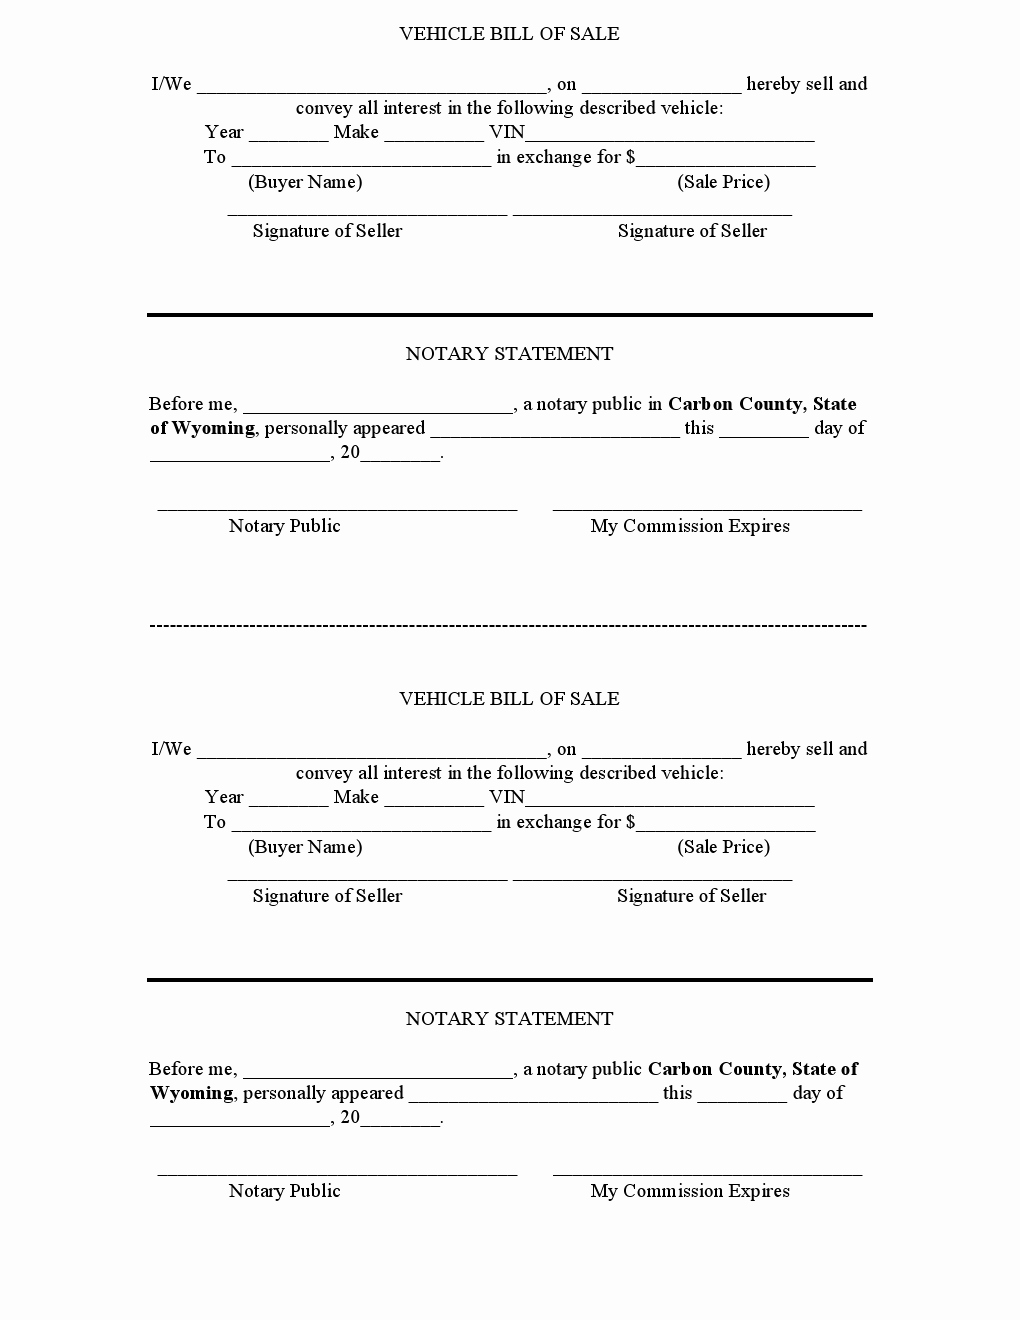 Automobile Bill Of Sale Georgia Beautiful Free Carbon Country Vehicle Bill Of Sale form Download